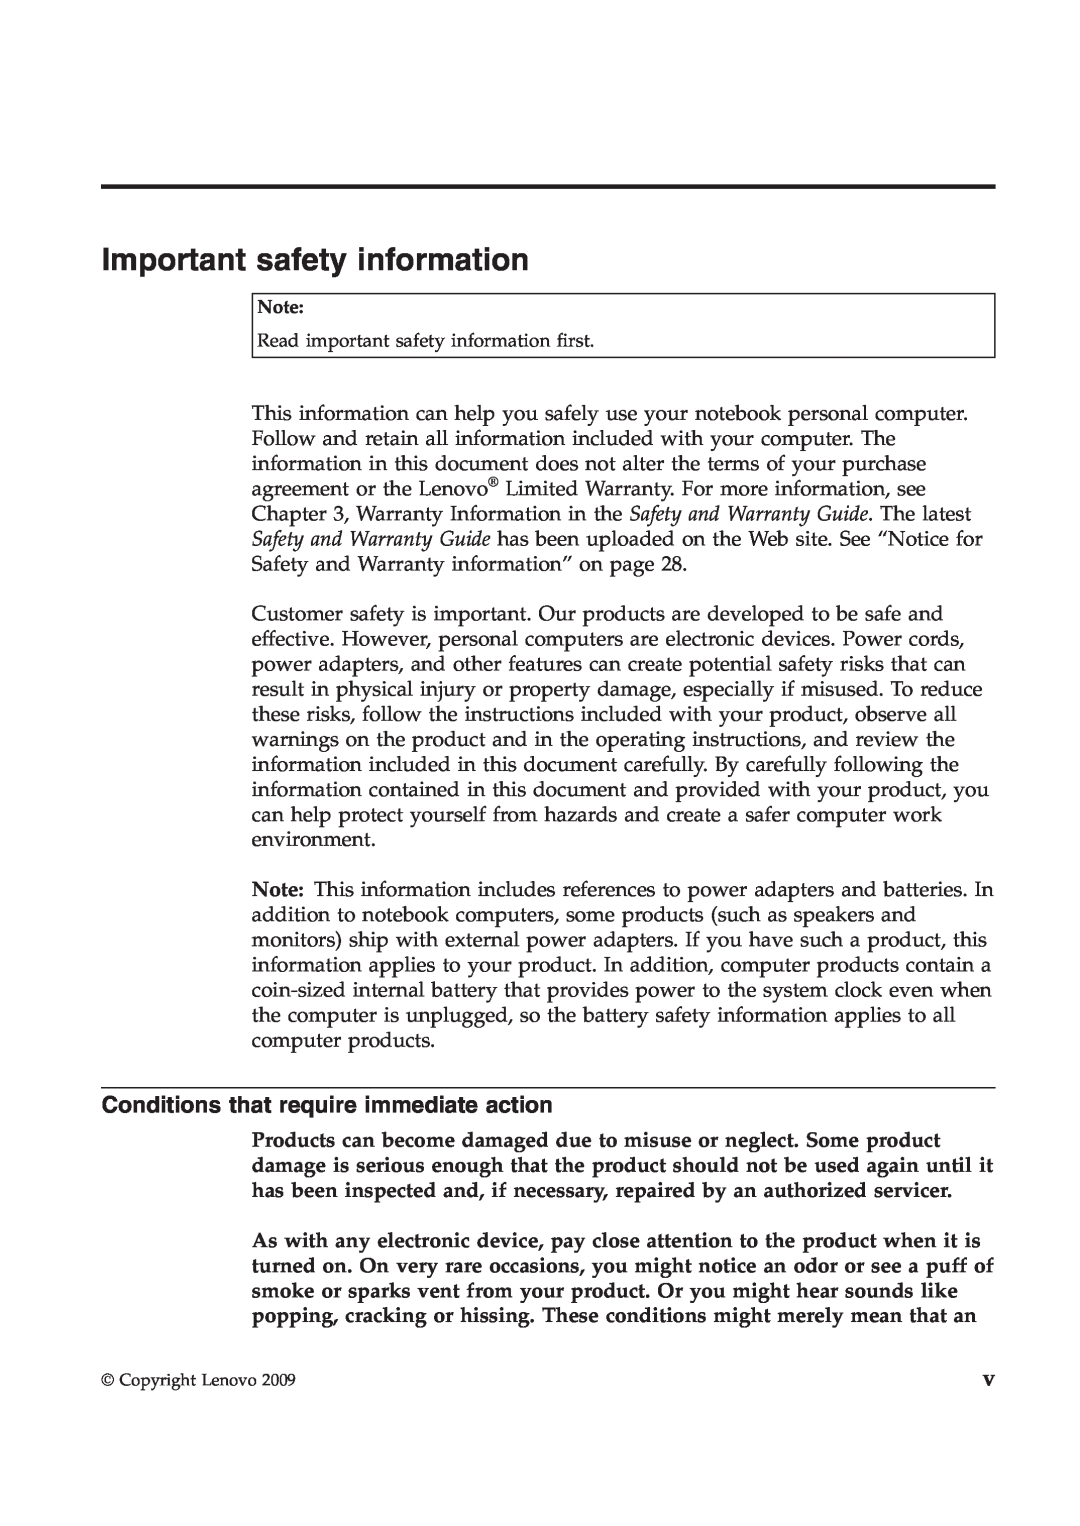 Lenovo T410S manual Important safety information, Conditions that require immediate action 